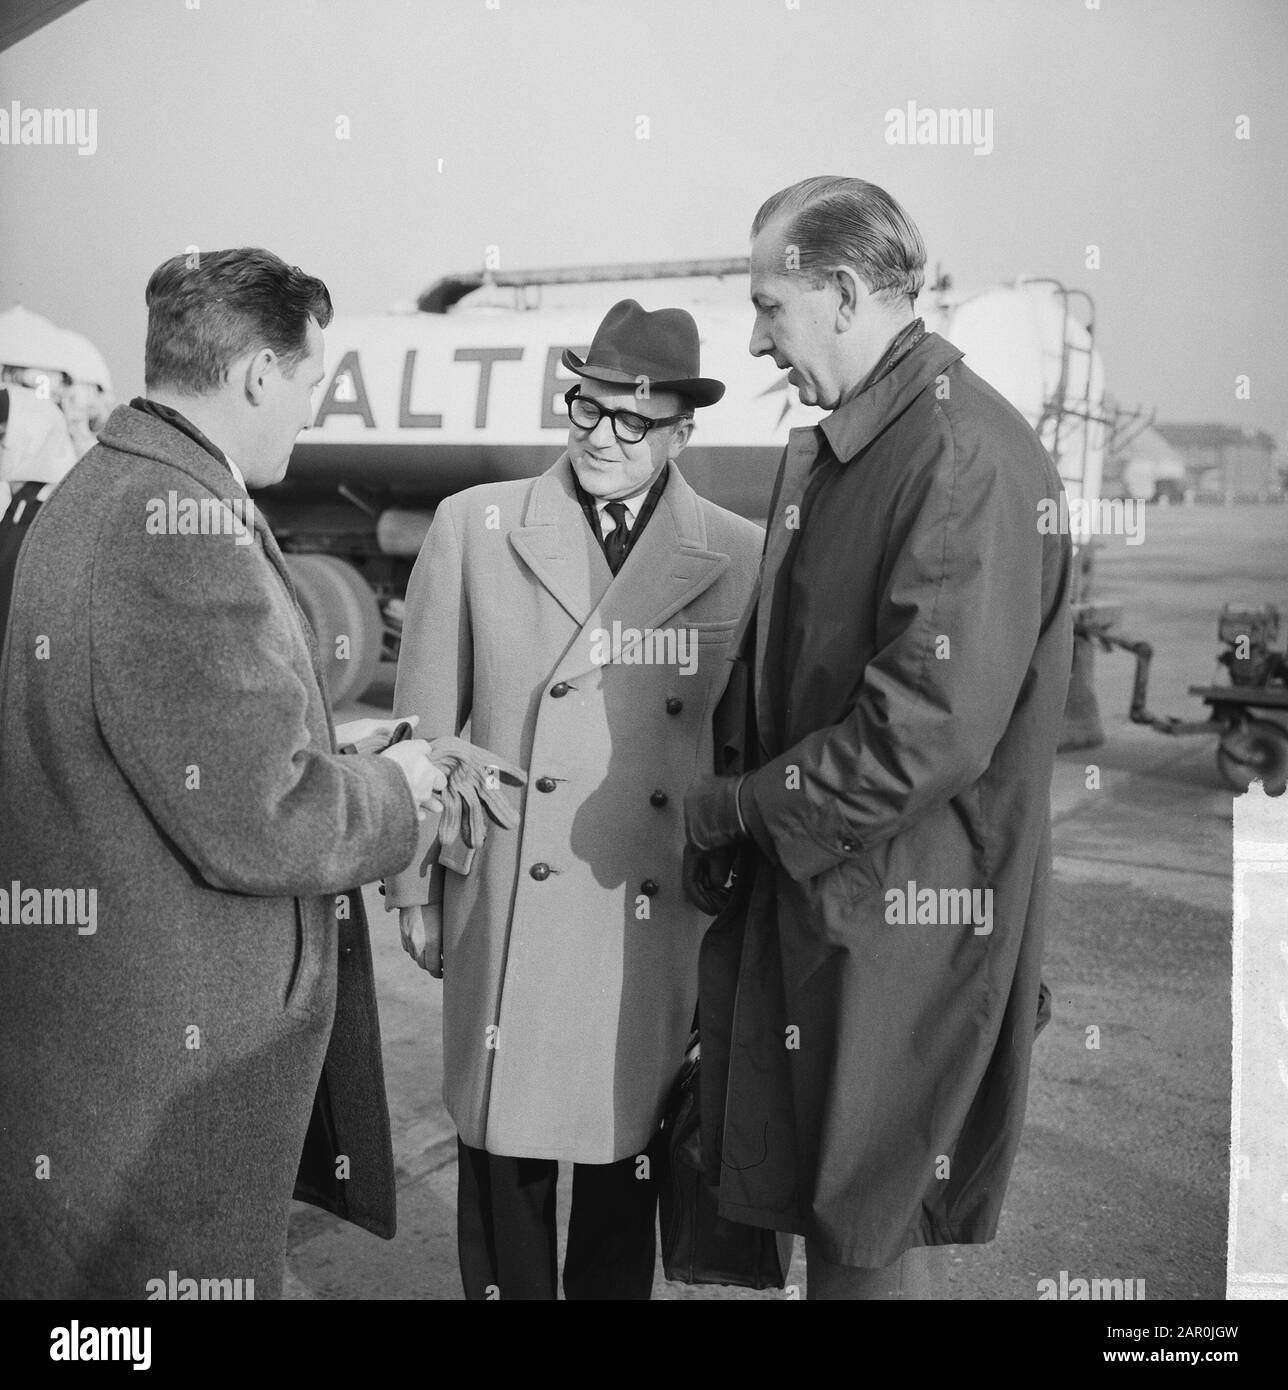 Assignment E. Alderse Baes, arrival of Mr Mac Shaver at Schiphol Date: 10 January 1964 Location: Noord-Holland, Schiphol Keywords: arrivals Personal name: E. Alderse Baes Stock Photo